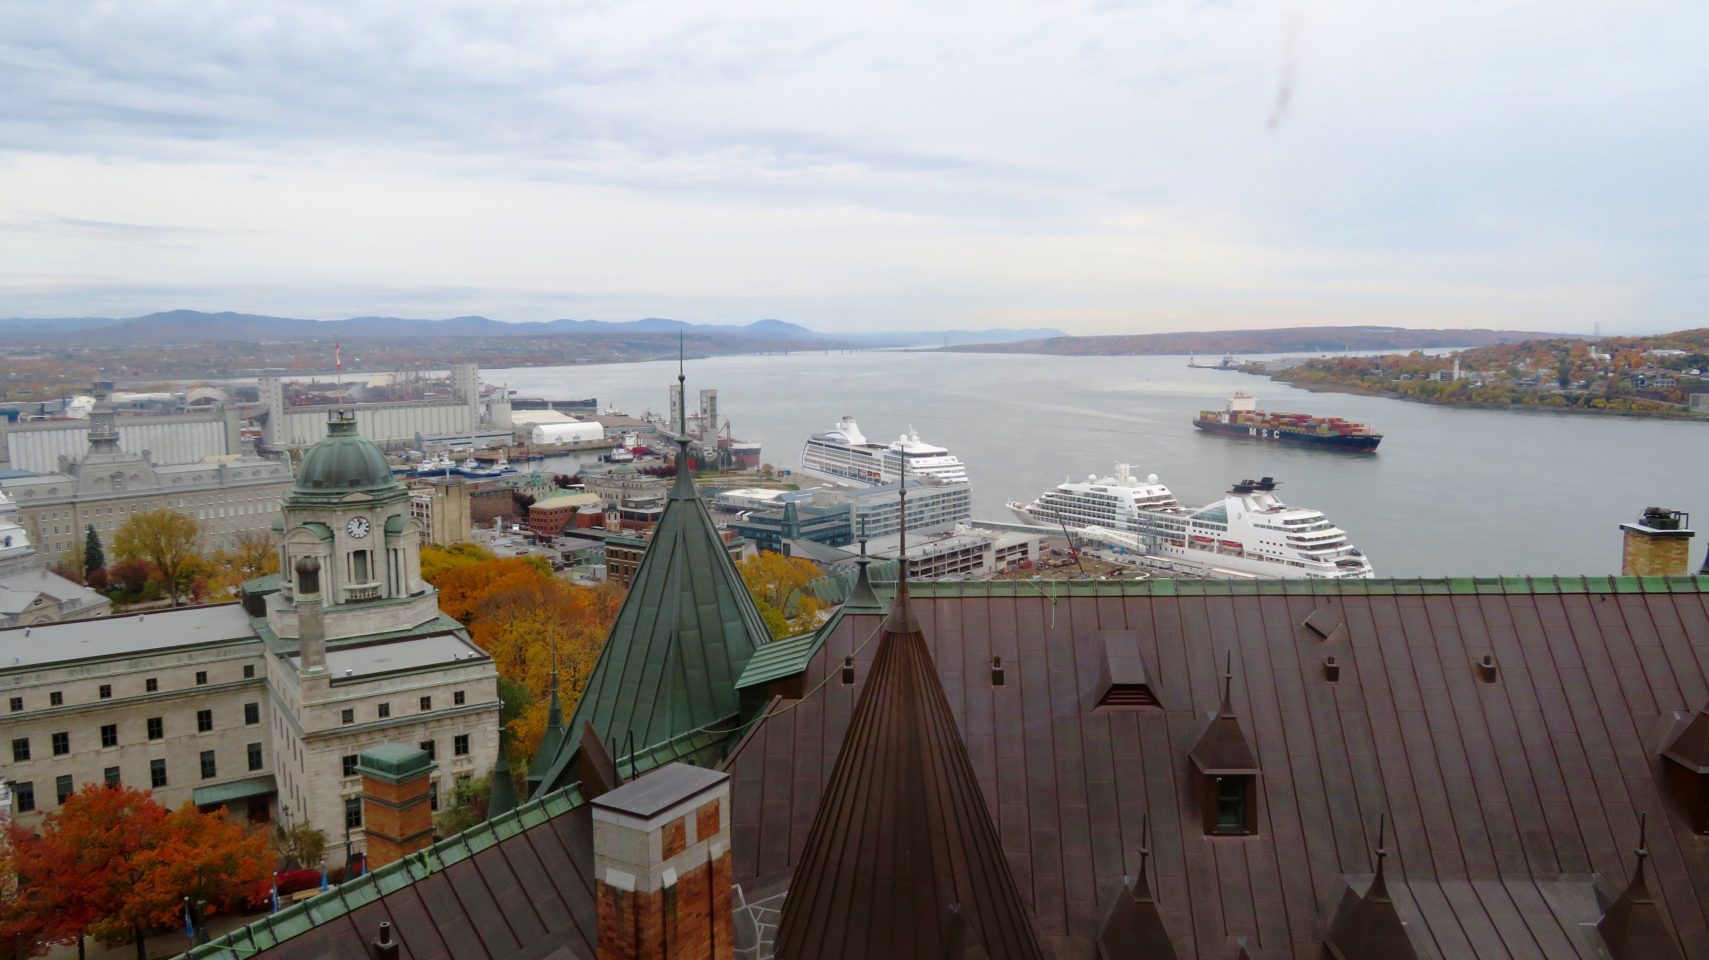 View of Quebec City, Levis and Ile d'Orleans from our guestroom at the Fairmont Le Chateau Frontenac